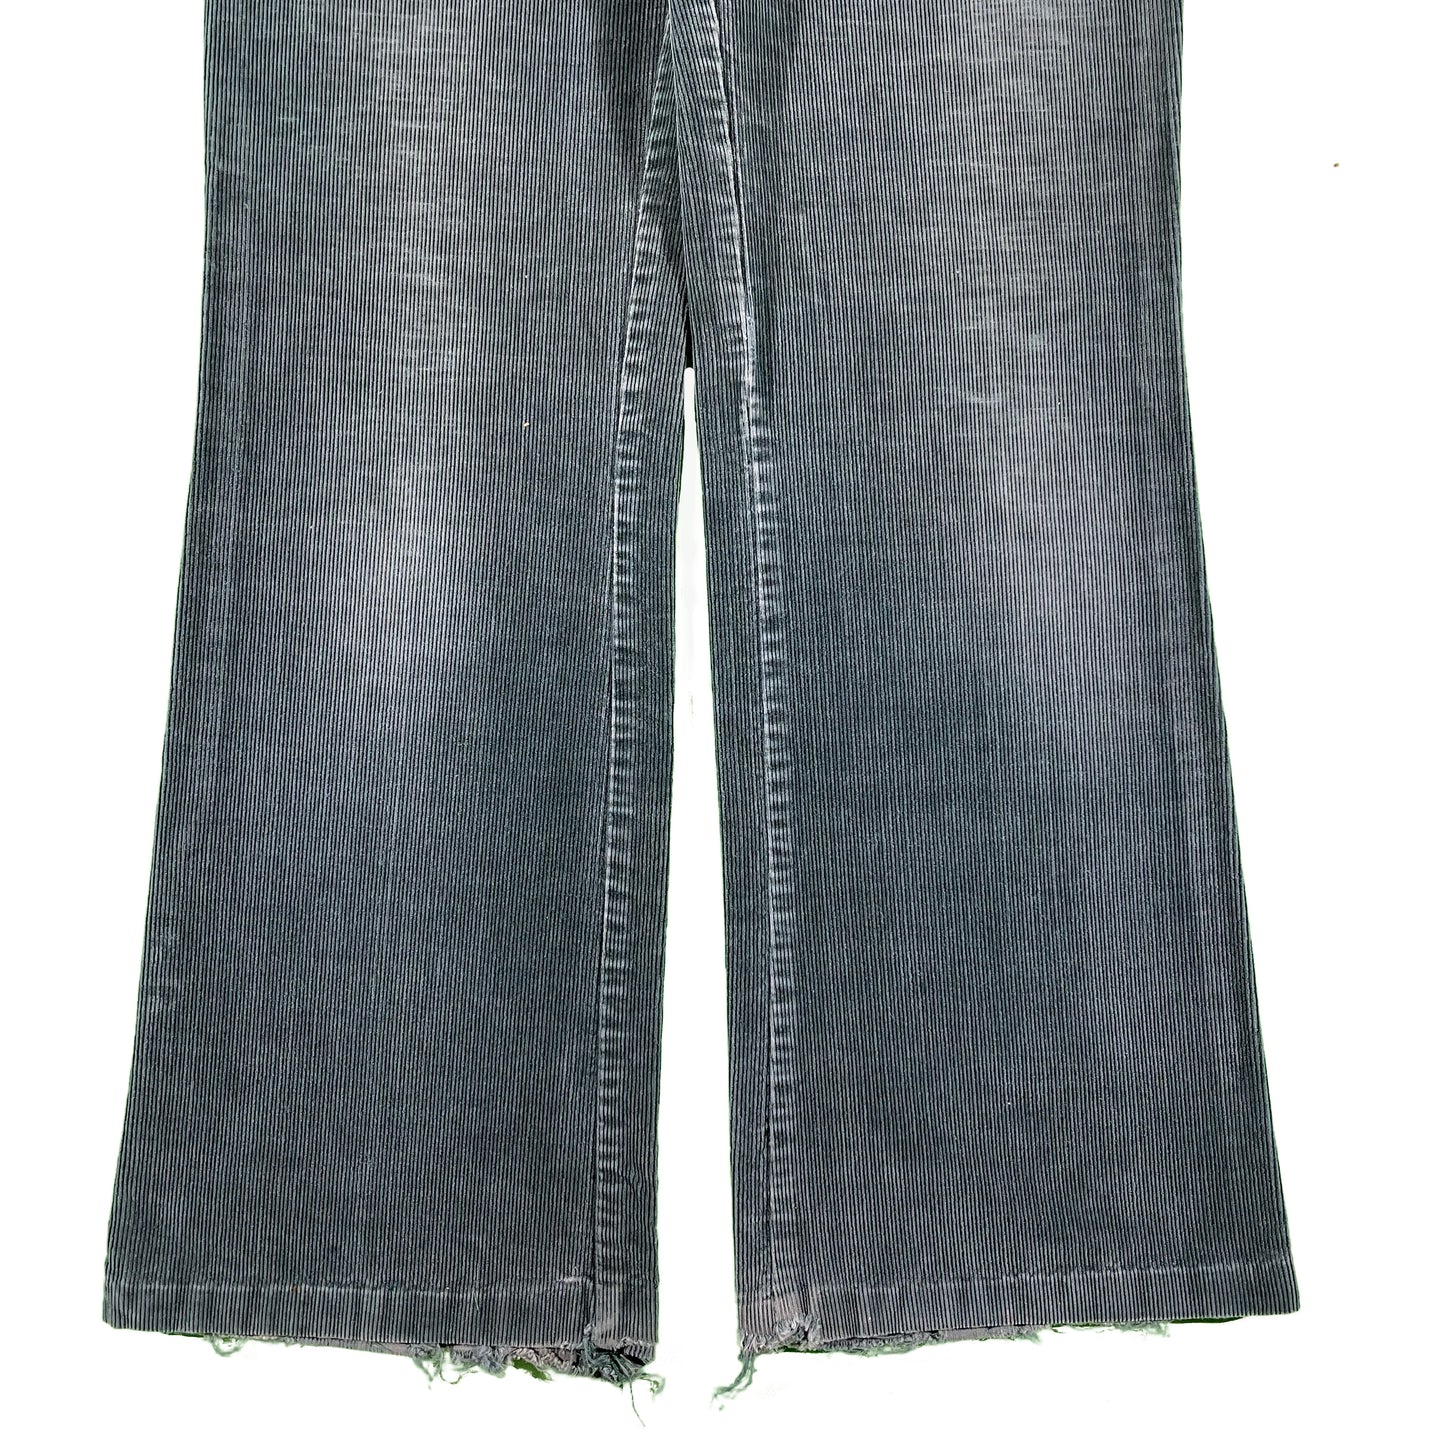 70s Forest Green Sears Corduroy Flares- 27x29.5